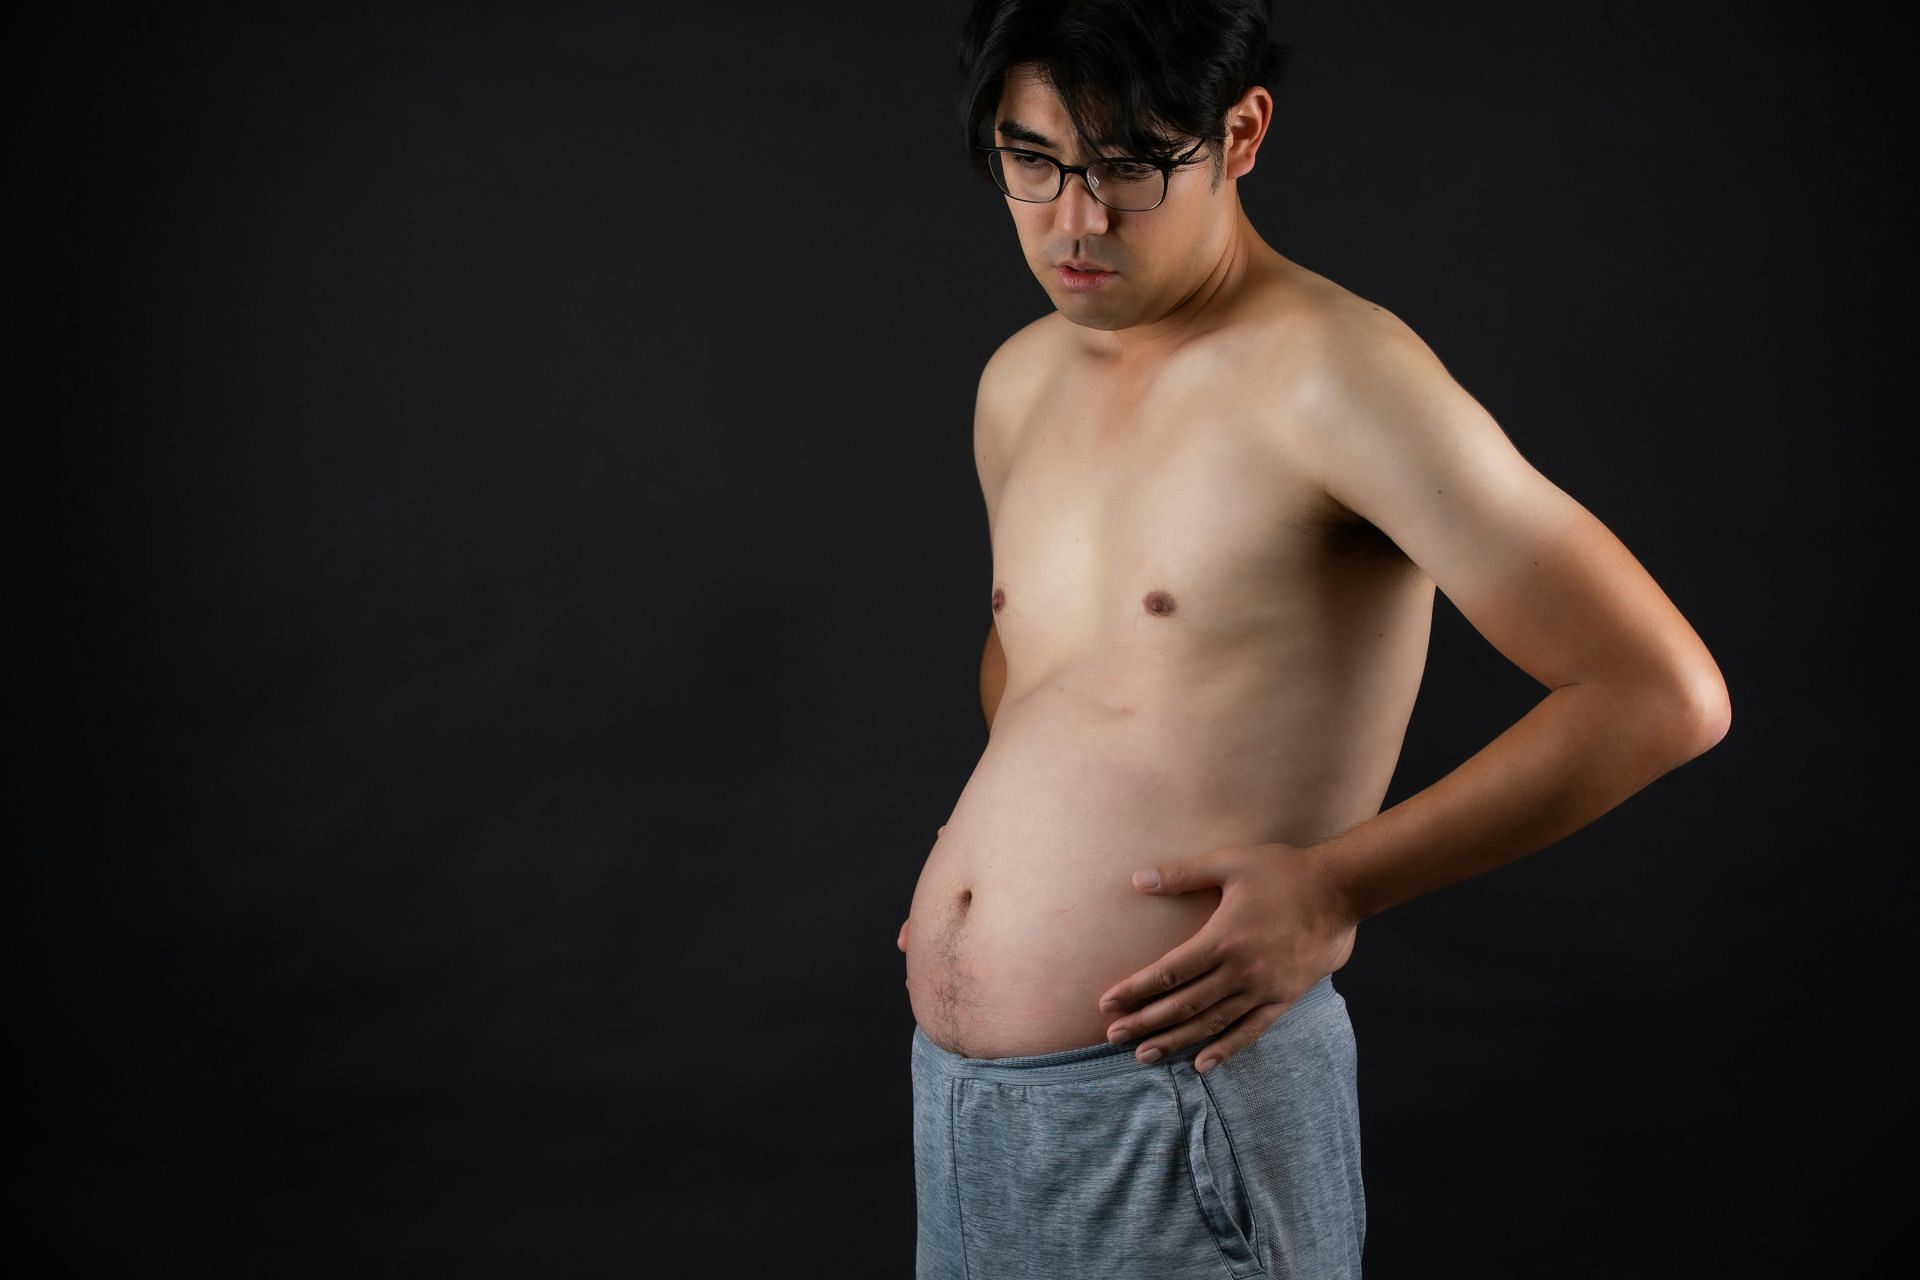 Obesity vs overweight: Are you overweight or obese? (Image by Sean S /Unsplash)